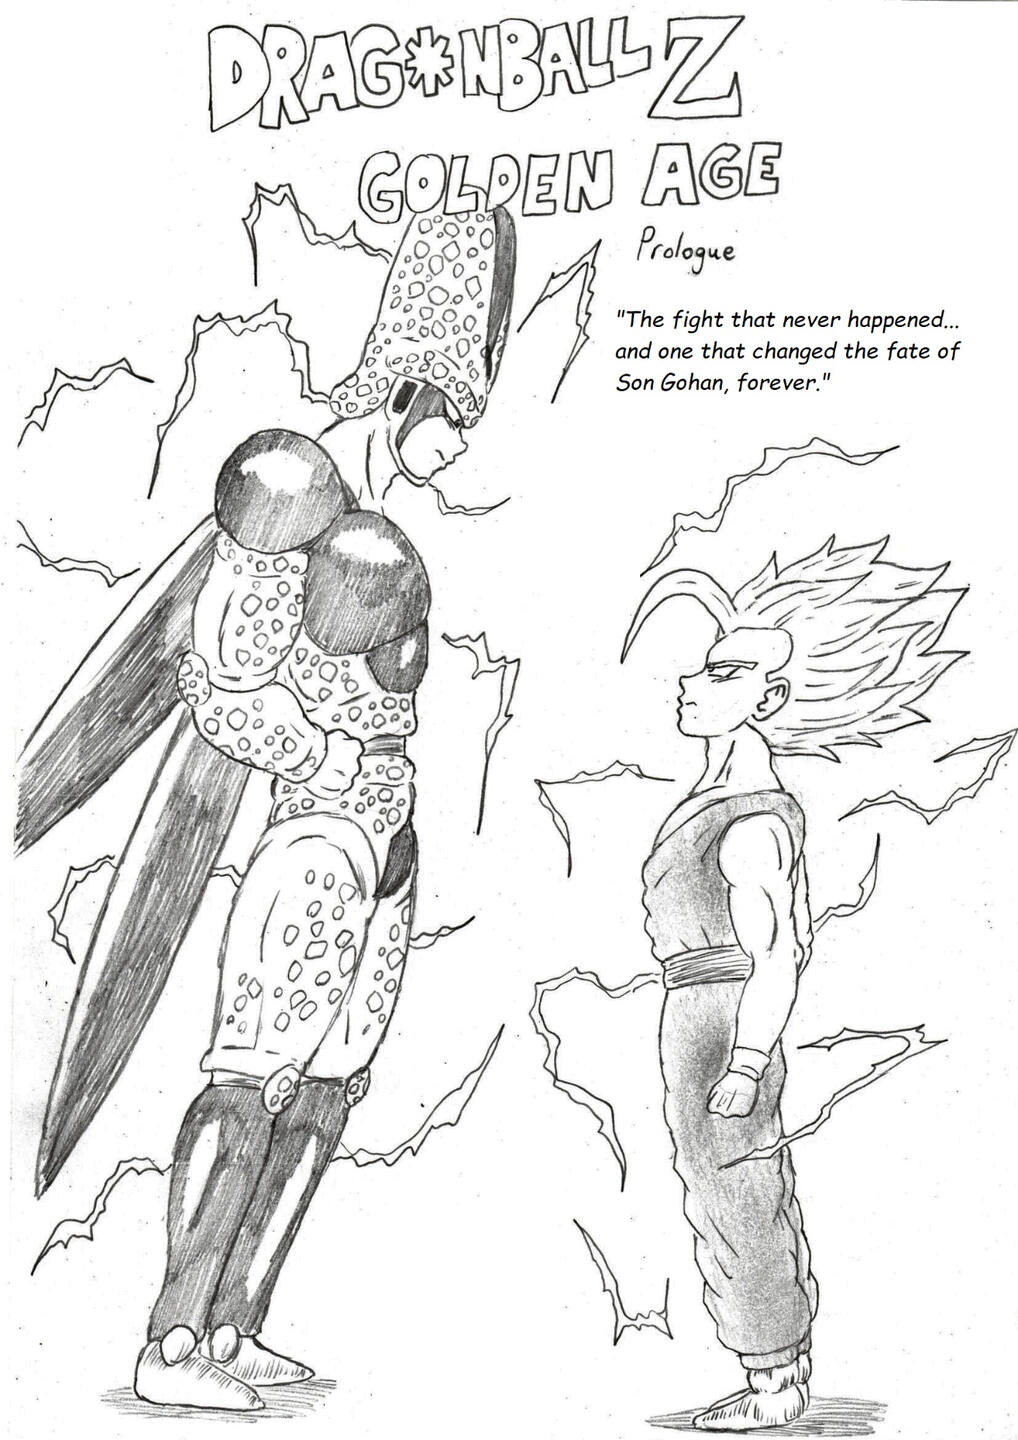 The Golden Age Chapter 1 Dragonball Z Golden Age - Chapter 1 - Prologue